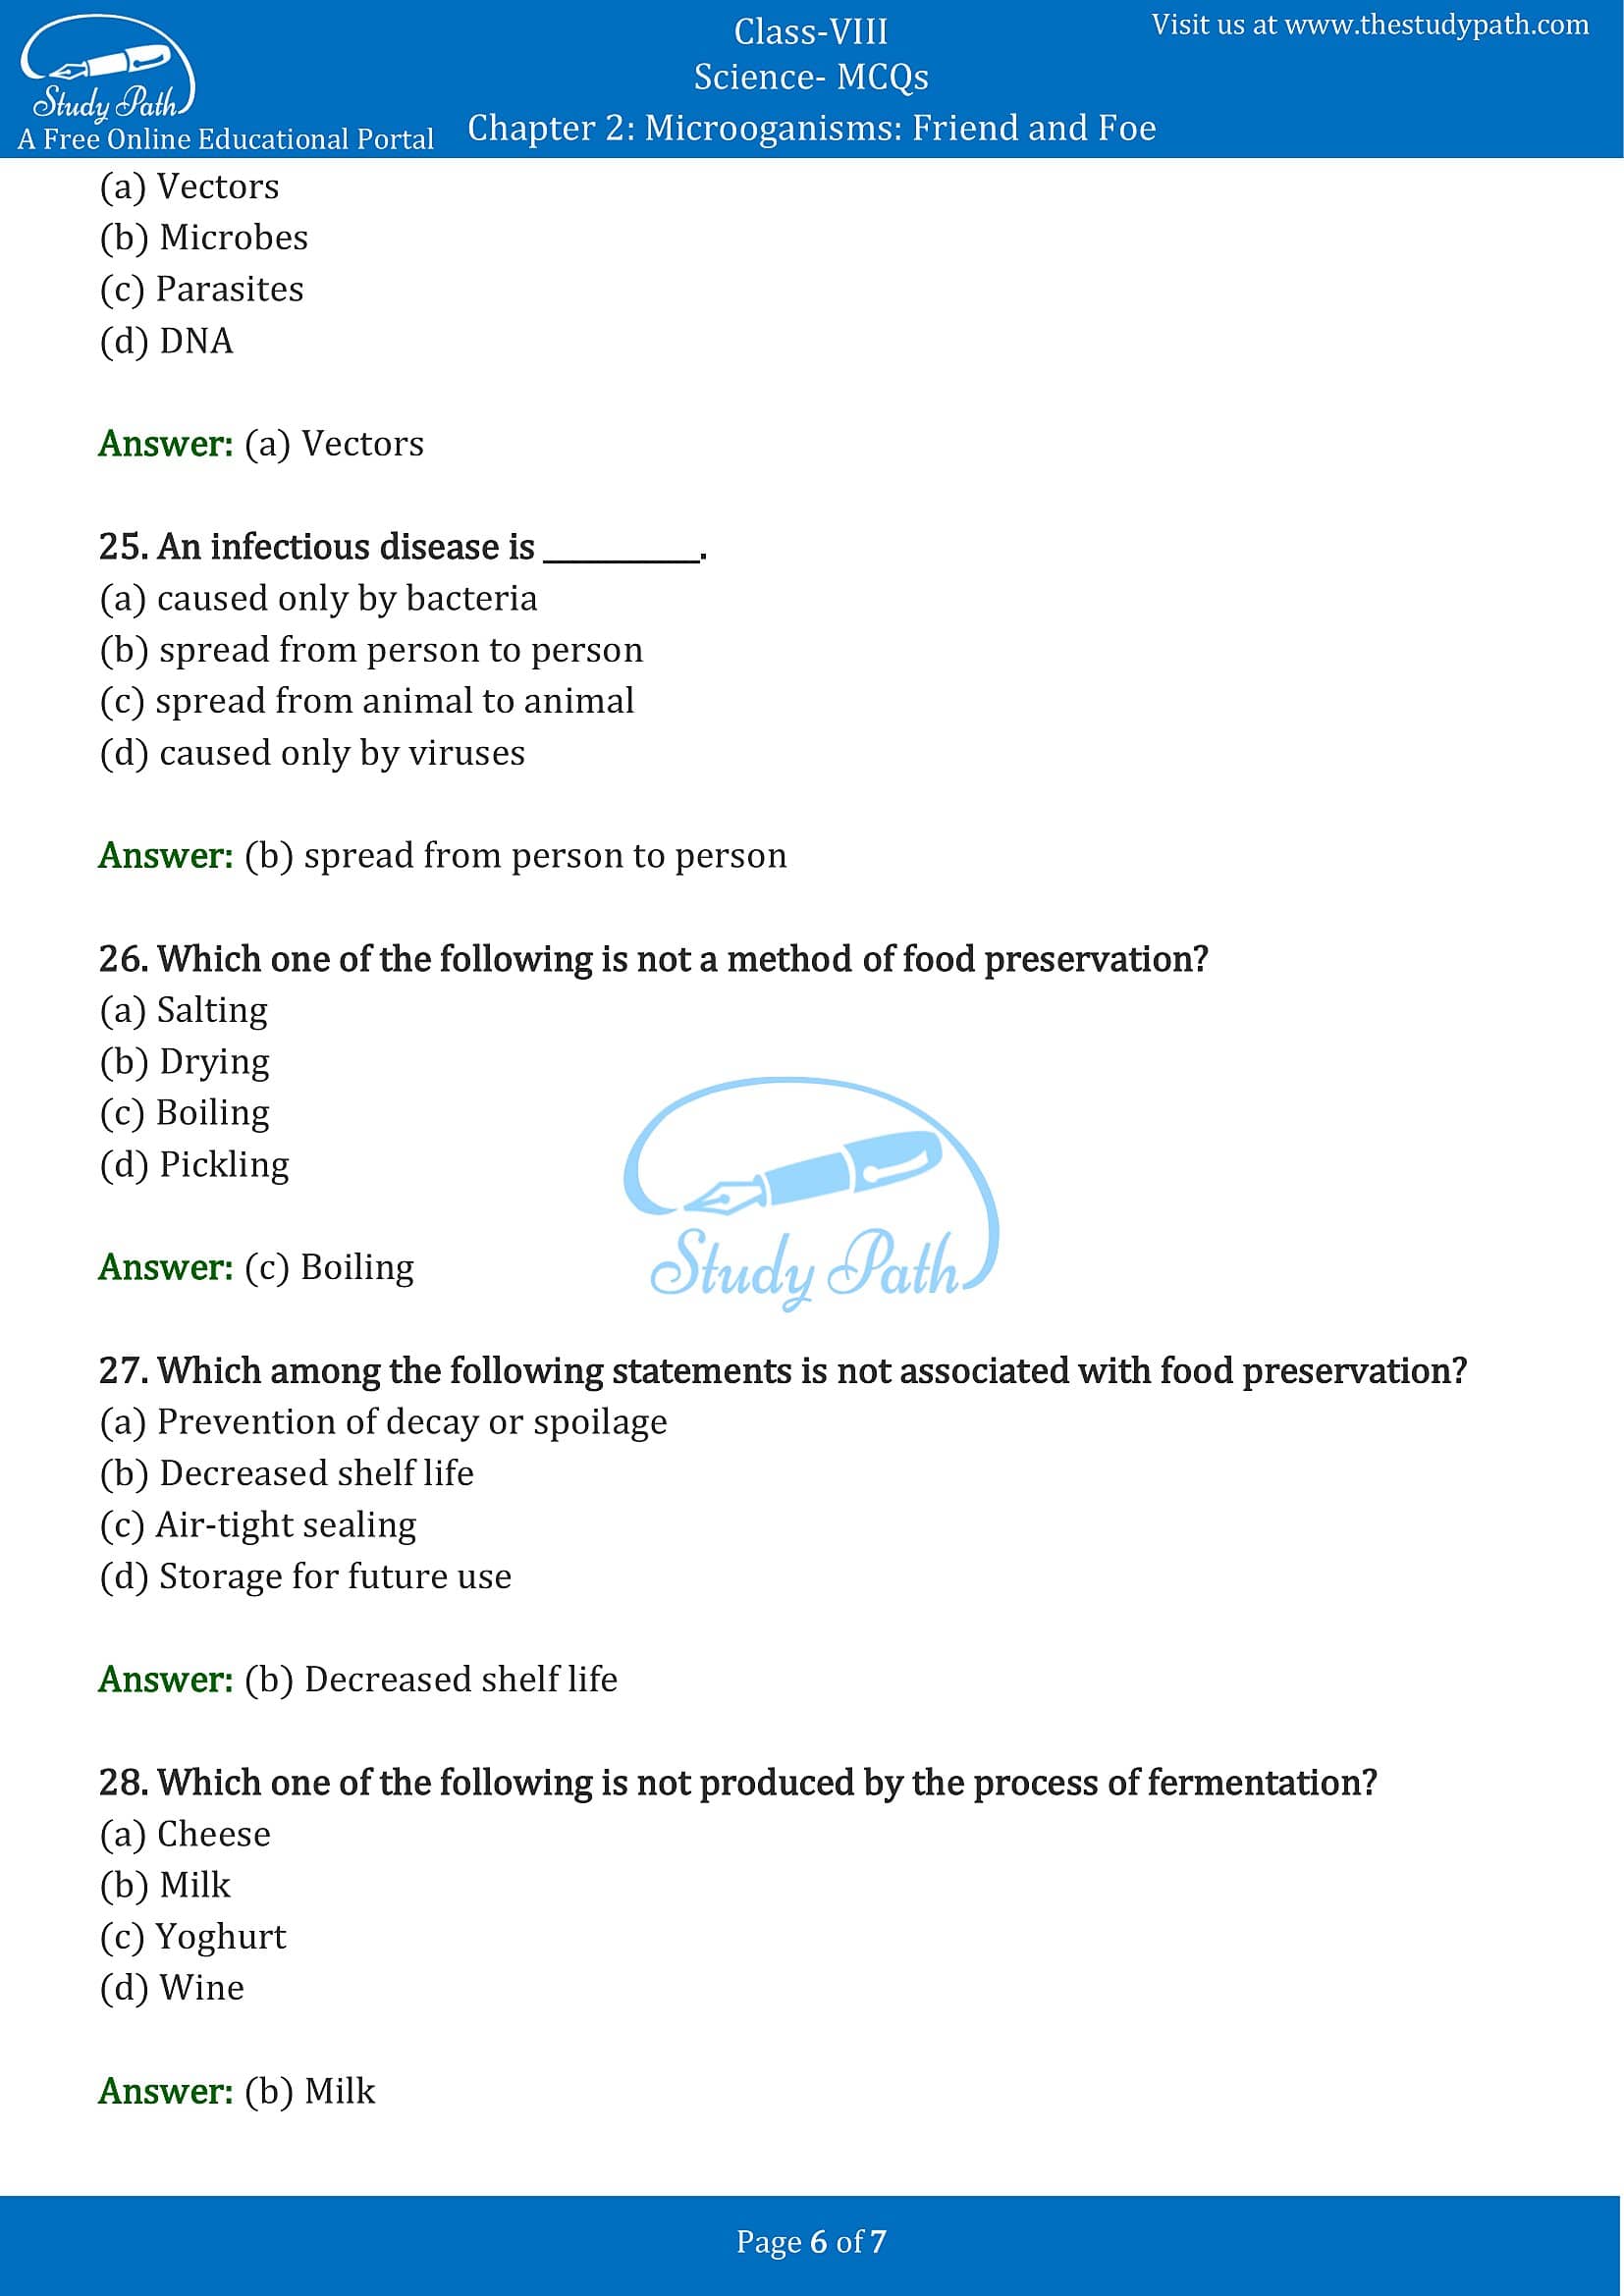 MCQ Questions for Class 8 Science Chapter 2 Microoganisms Friend and Foe with Answers PDF -6